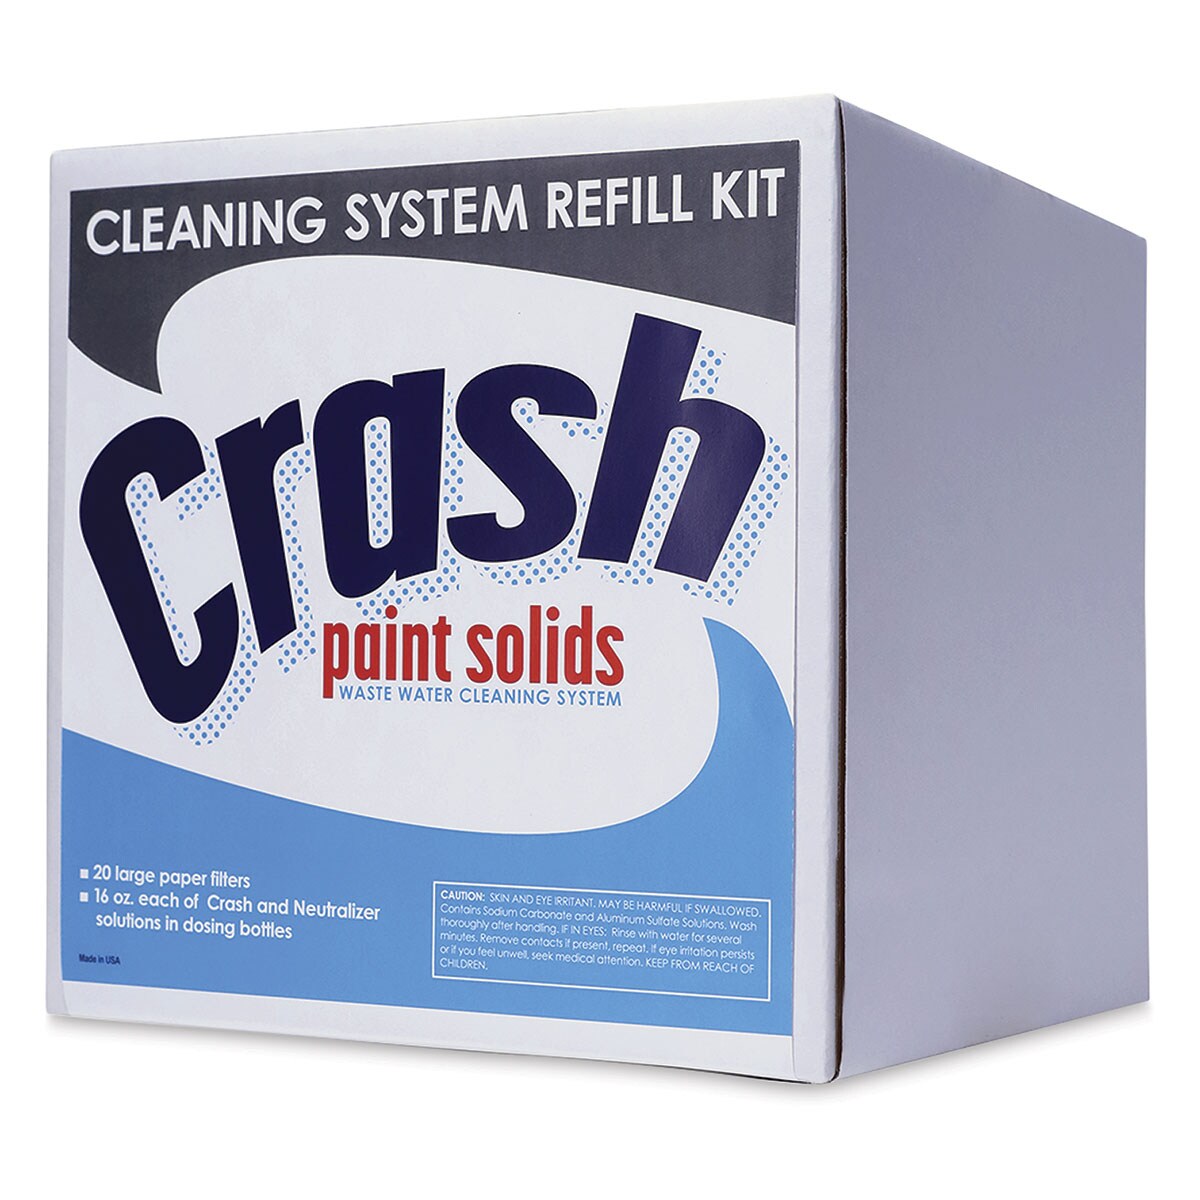 Golden Crash Paint Solids Waste Water Cleaning System, Refill Kit